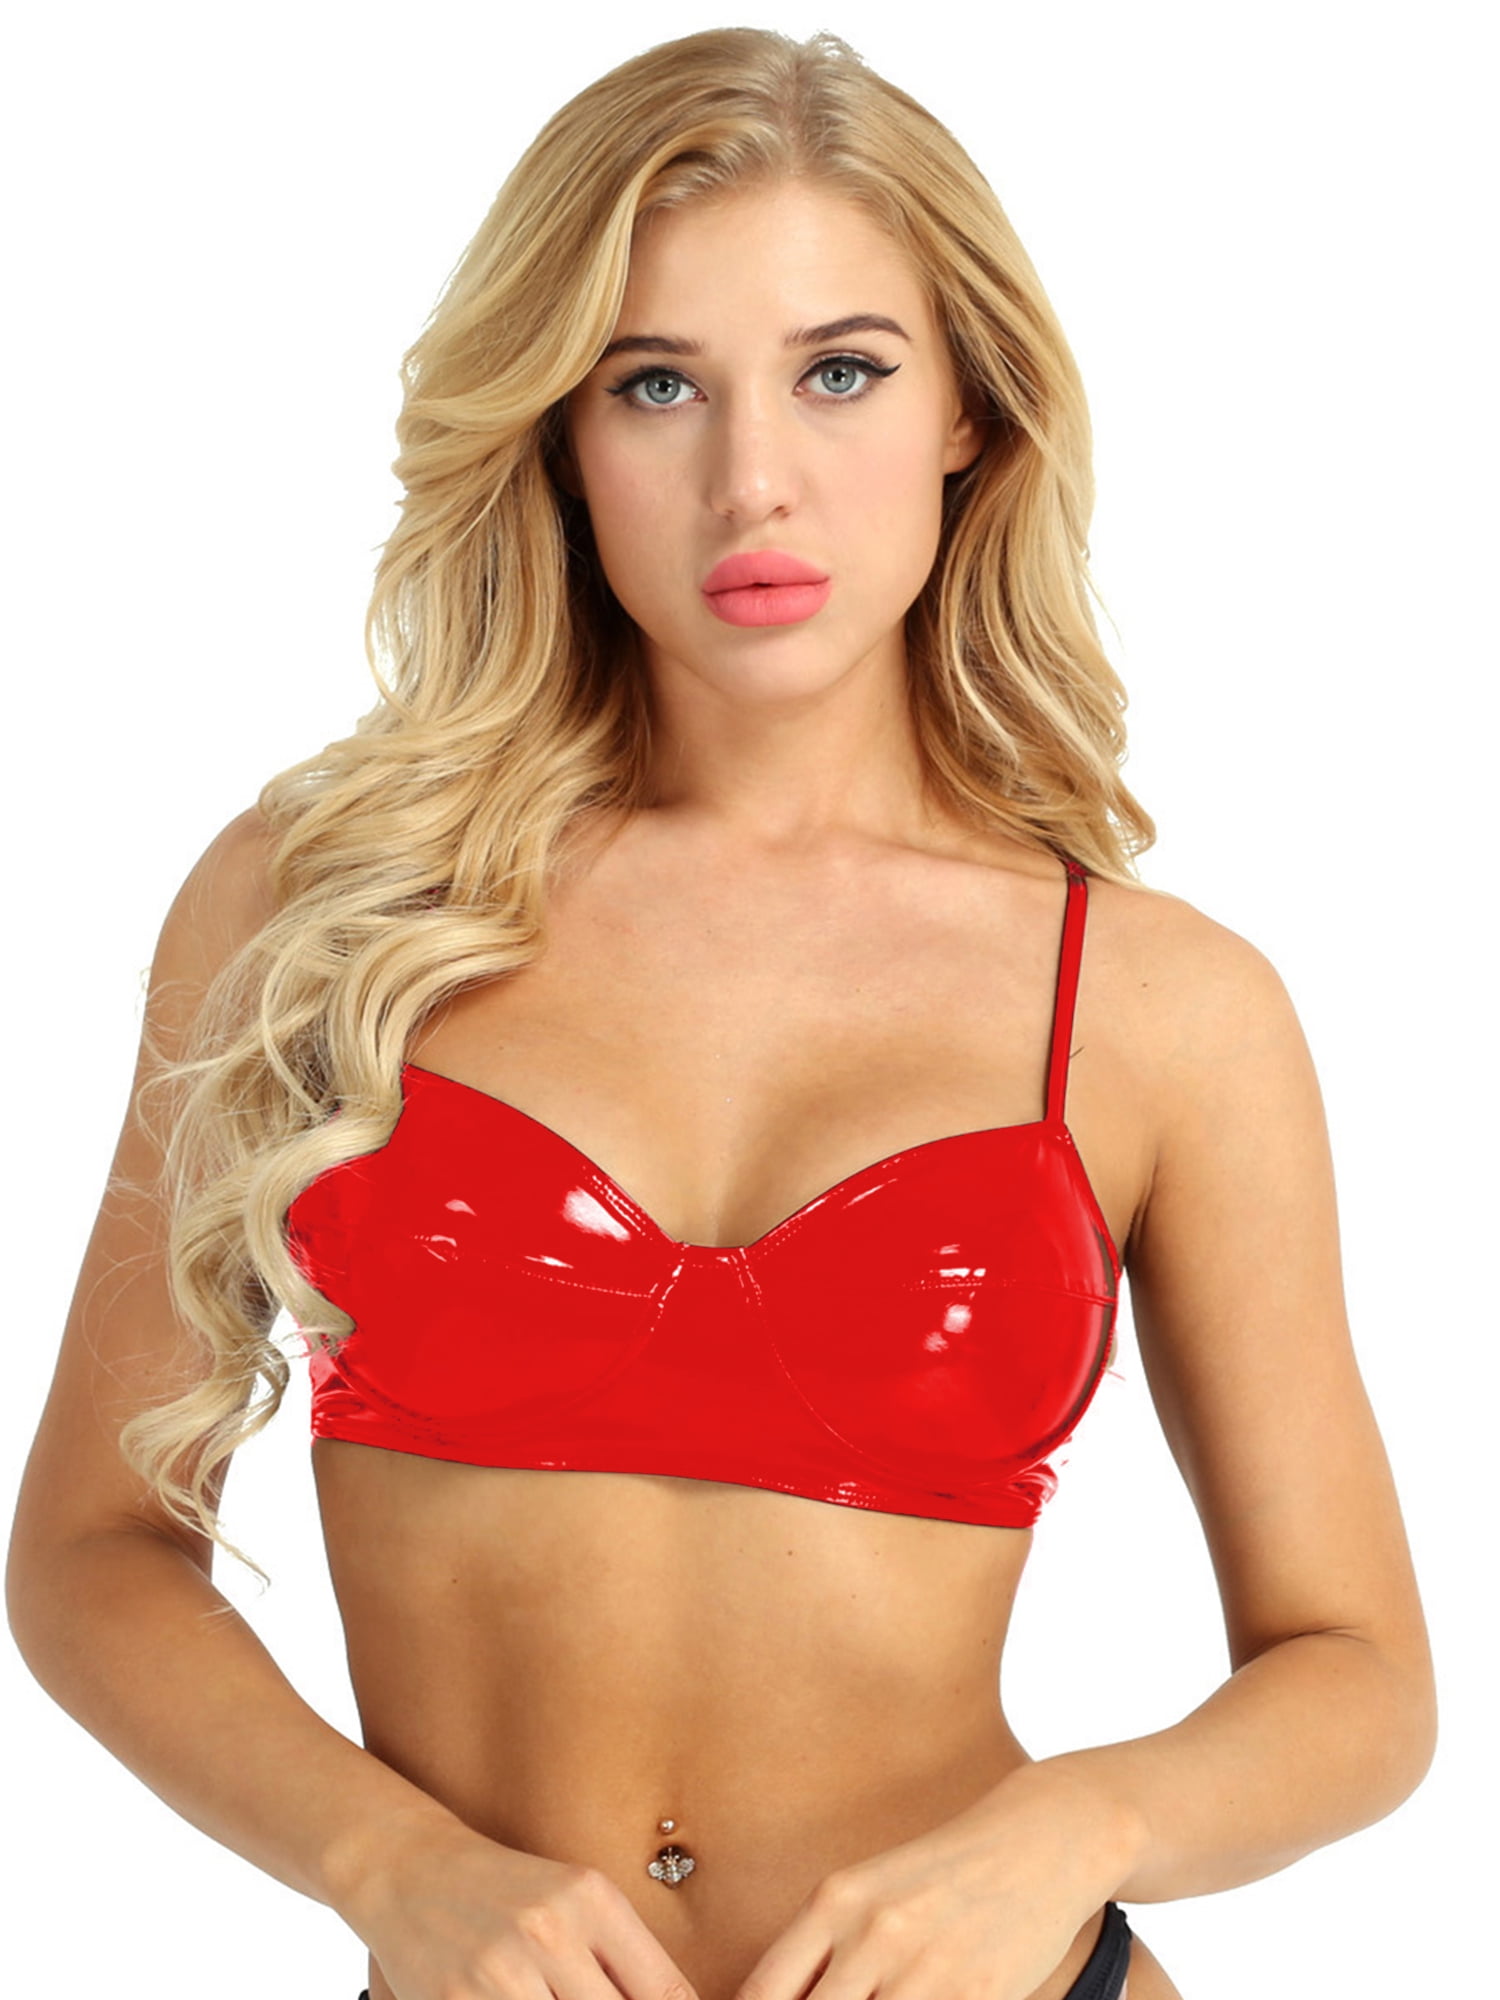 DPOIS Womens Shiny Faux Leather Bra Wetlook No Padded Bralette Corset Red M